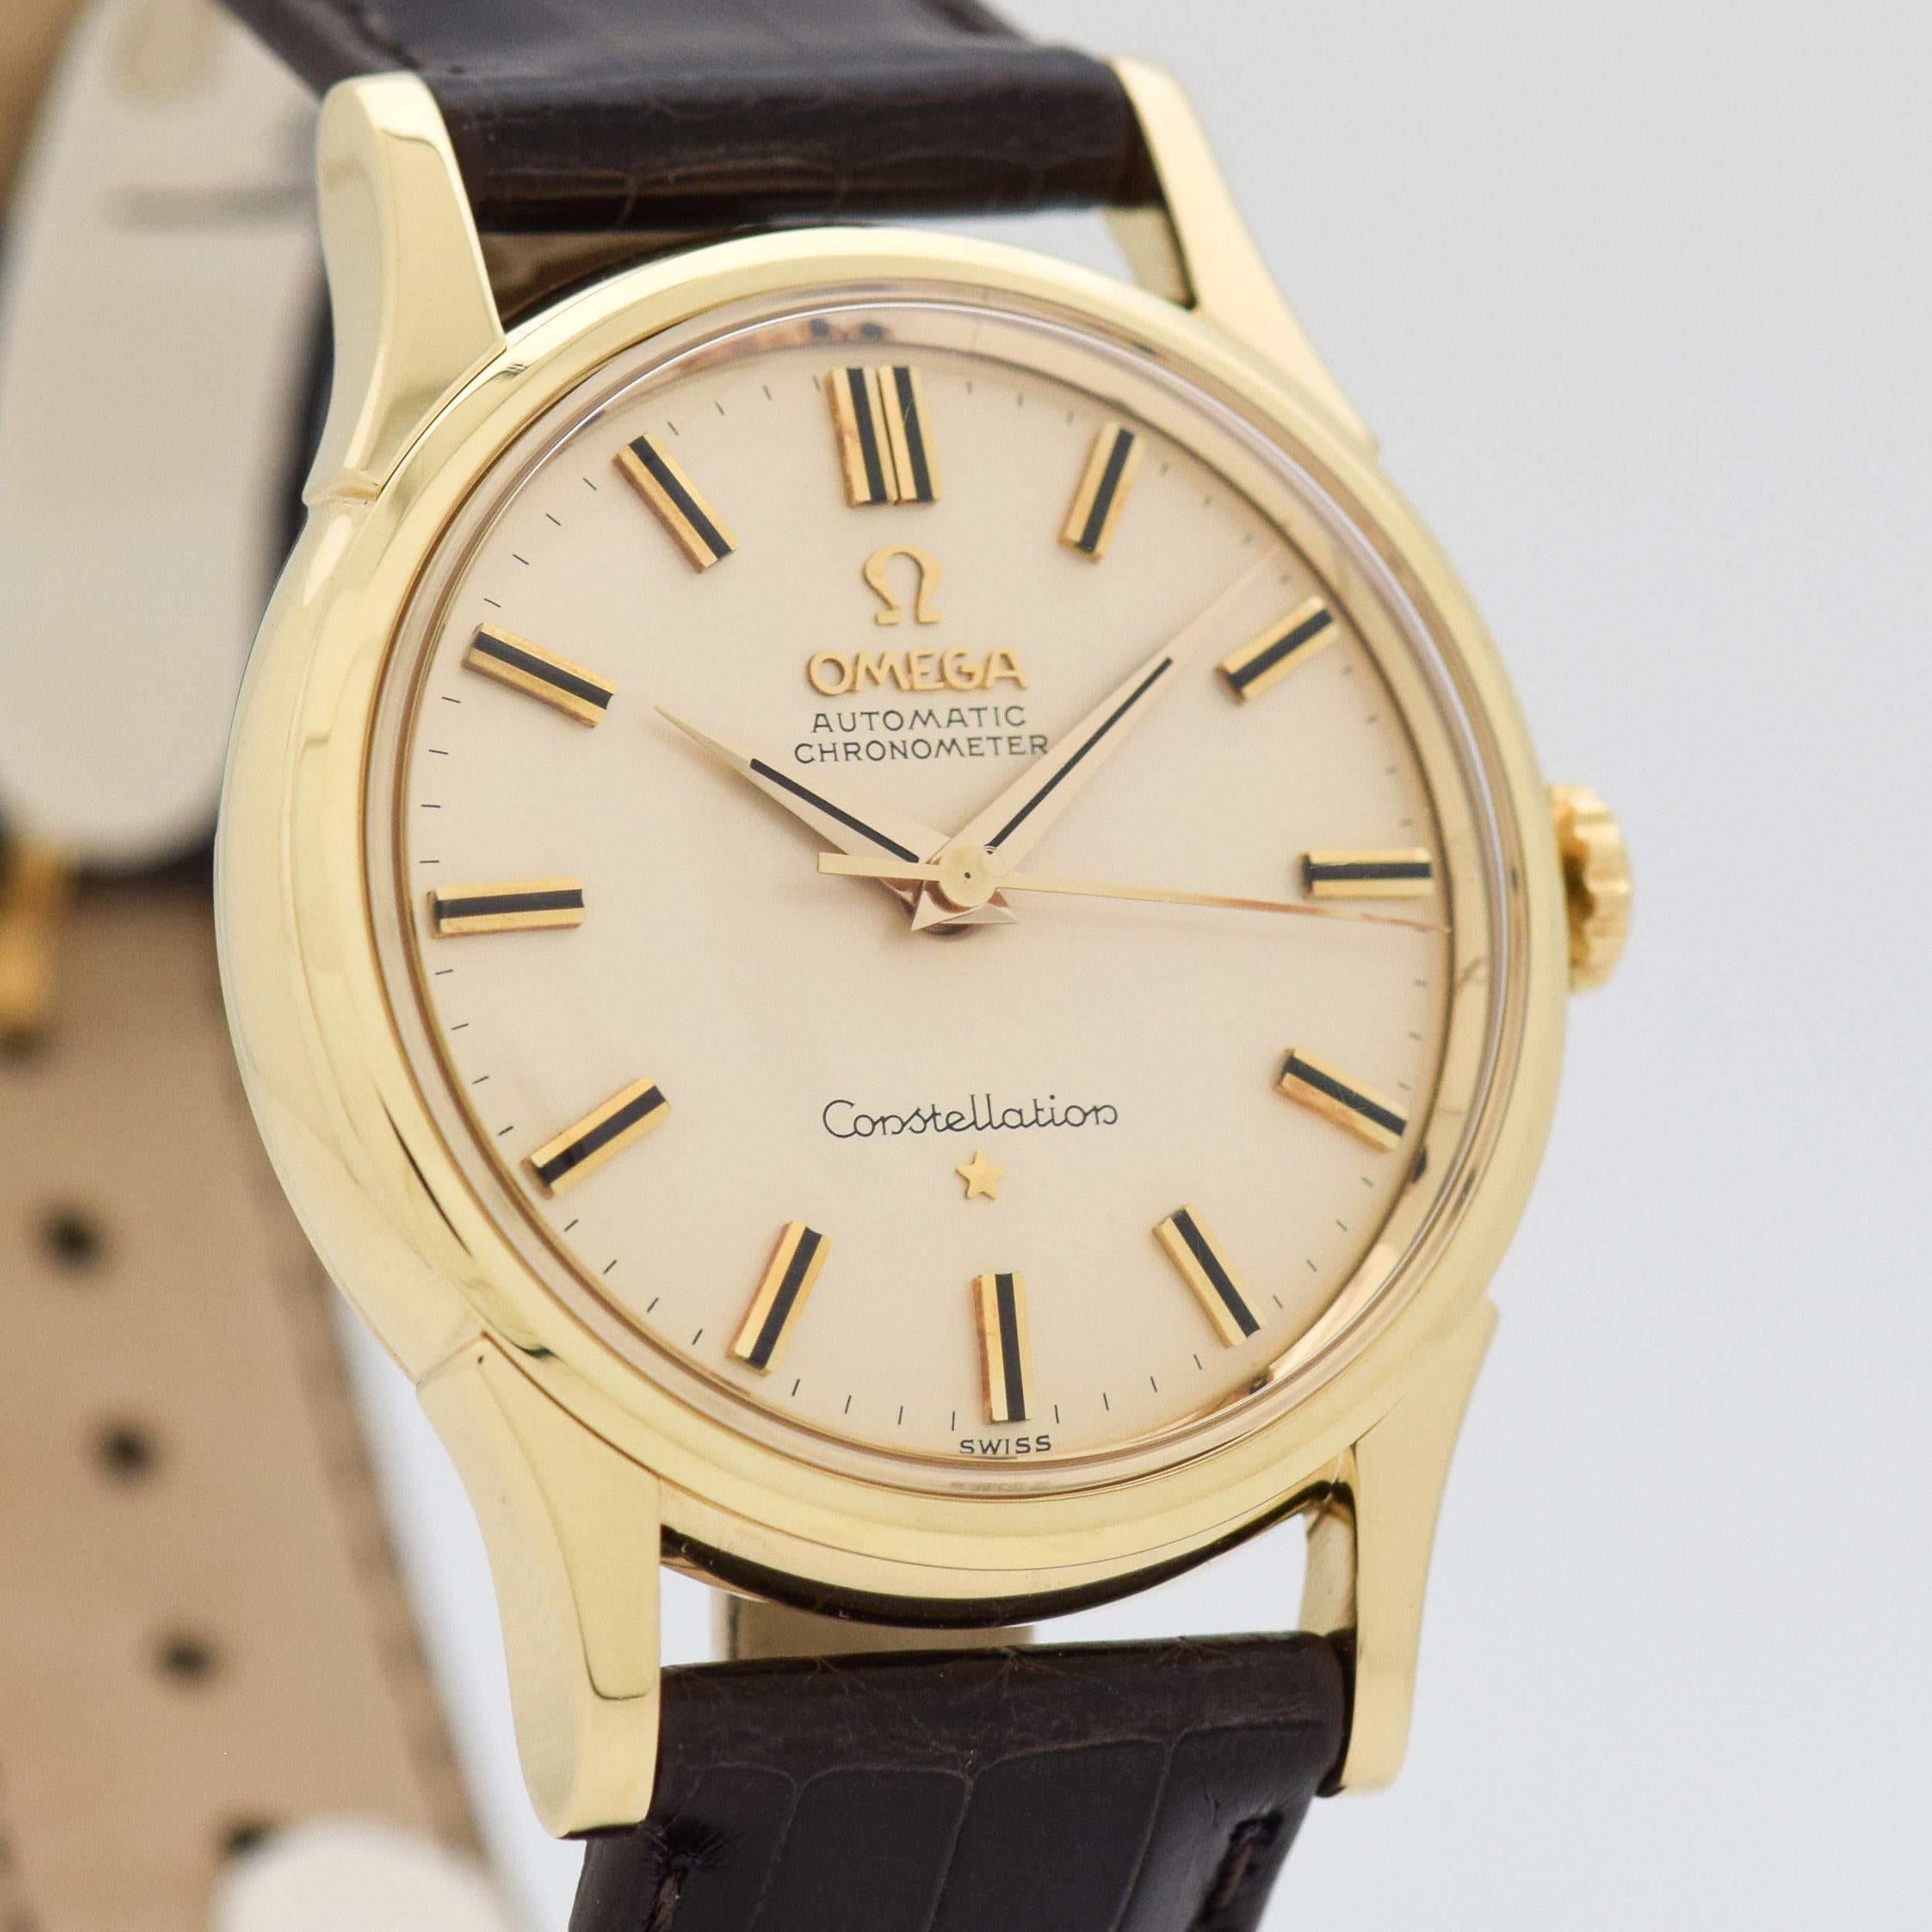 1961 Vintage Omega Constellation Ref. 14381/2 14K Yellow Gold watch with Original Silver Dial with Applied Gold Beveled Stick/Bar/Baton Markers with Black Inlay. 34mm x 43mm lug to lug (1.34 in. x 1.69 in.) - Powered by a 24-jewel, automatic caliber